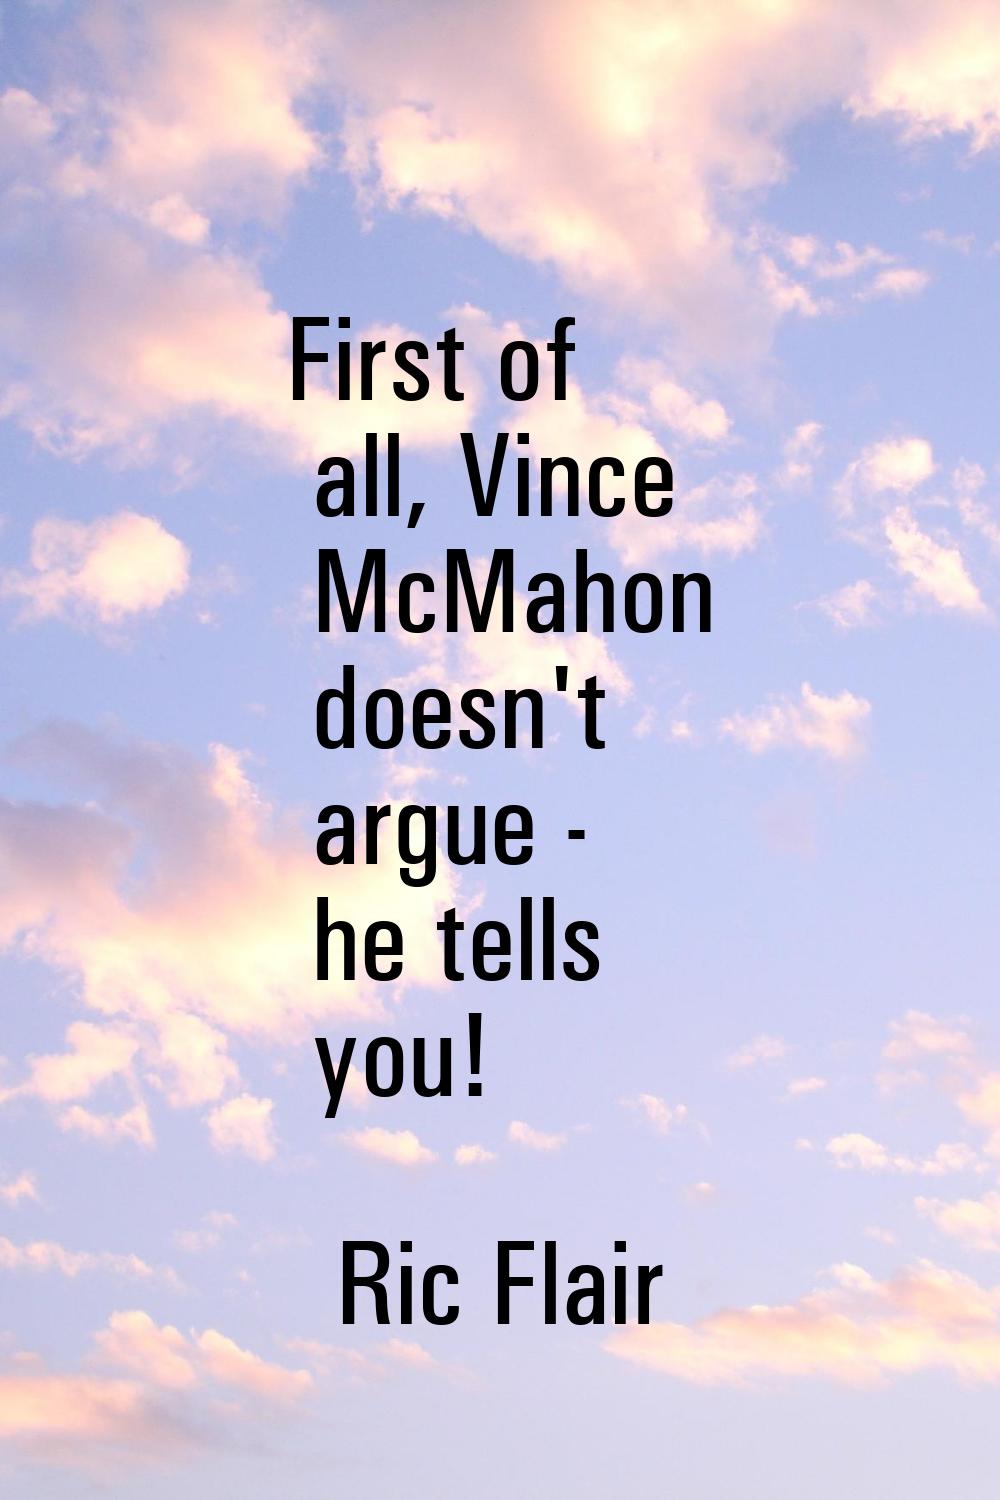 First of all, Vince McMahon doesn't argue - he tells you!